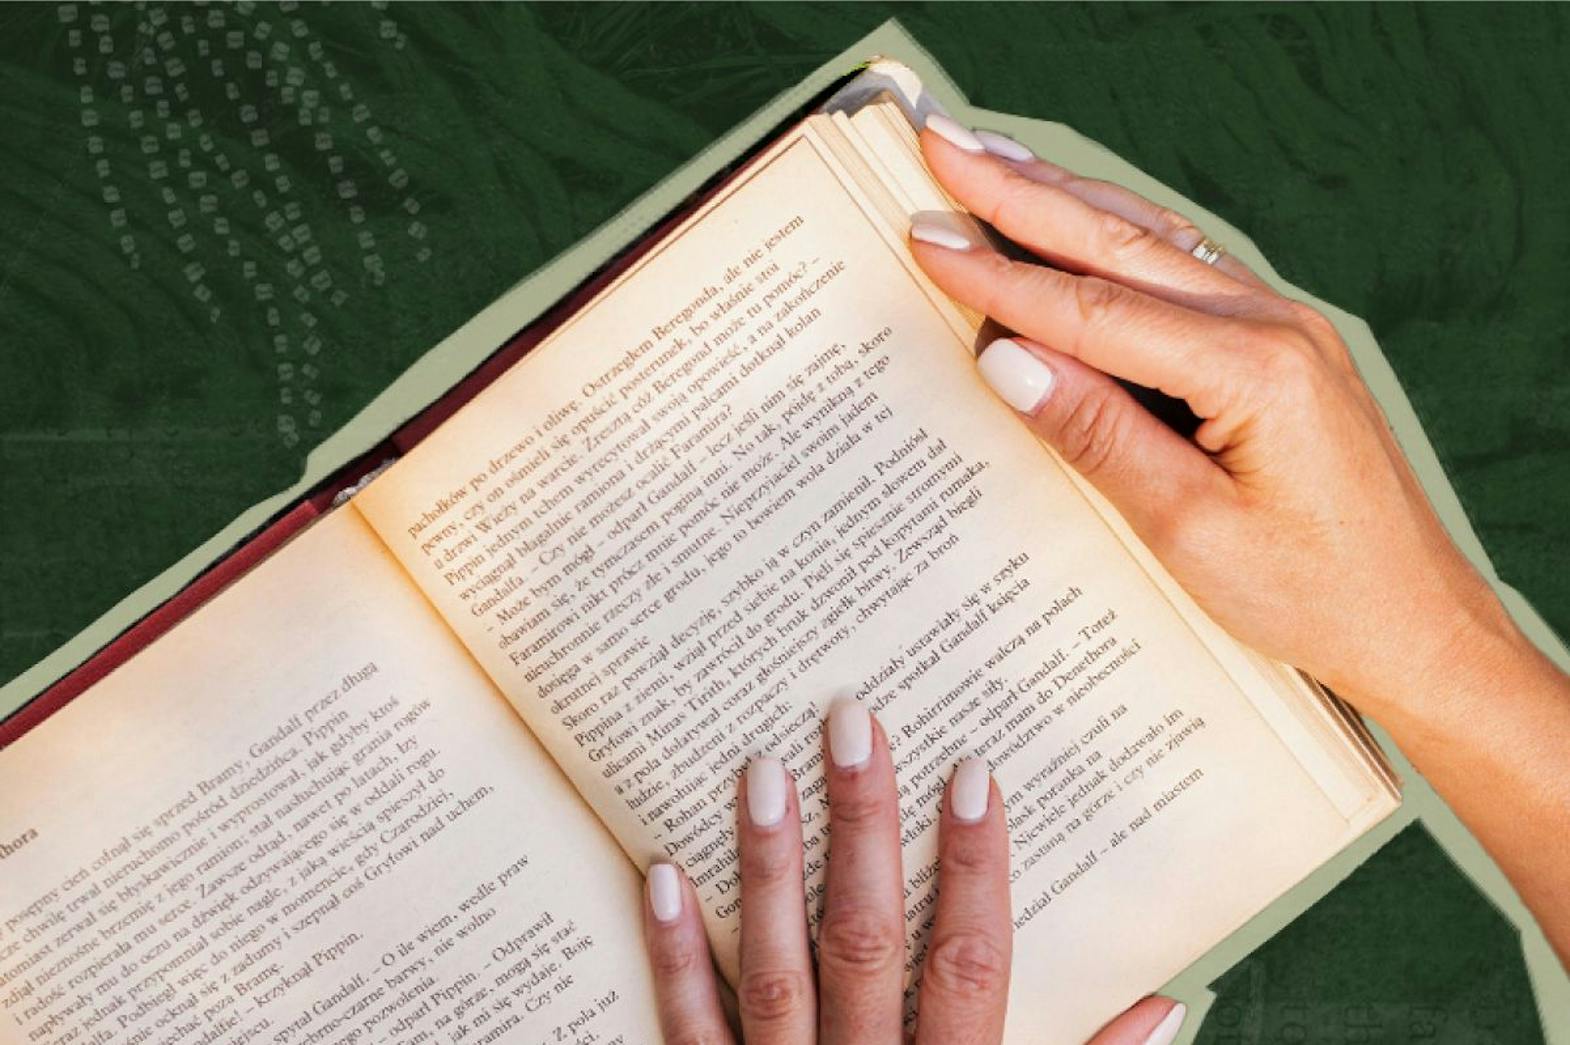 Hands holding a book